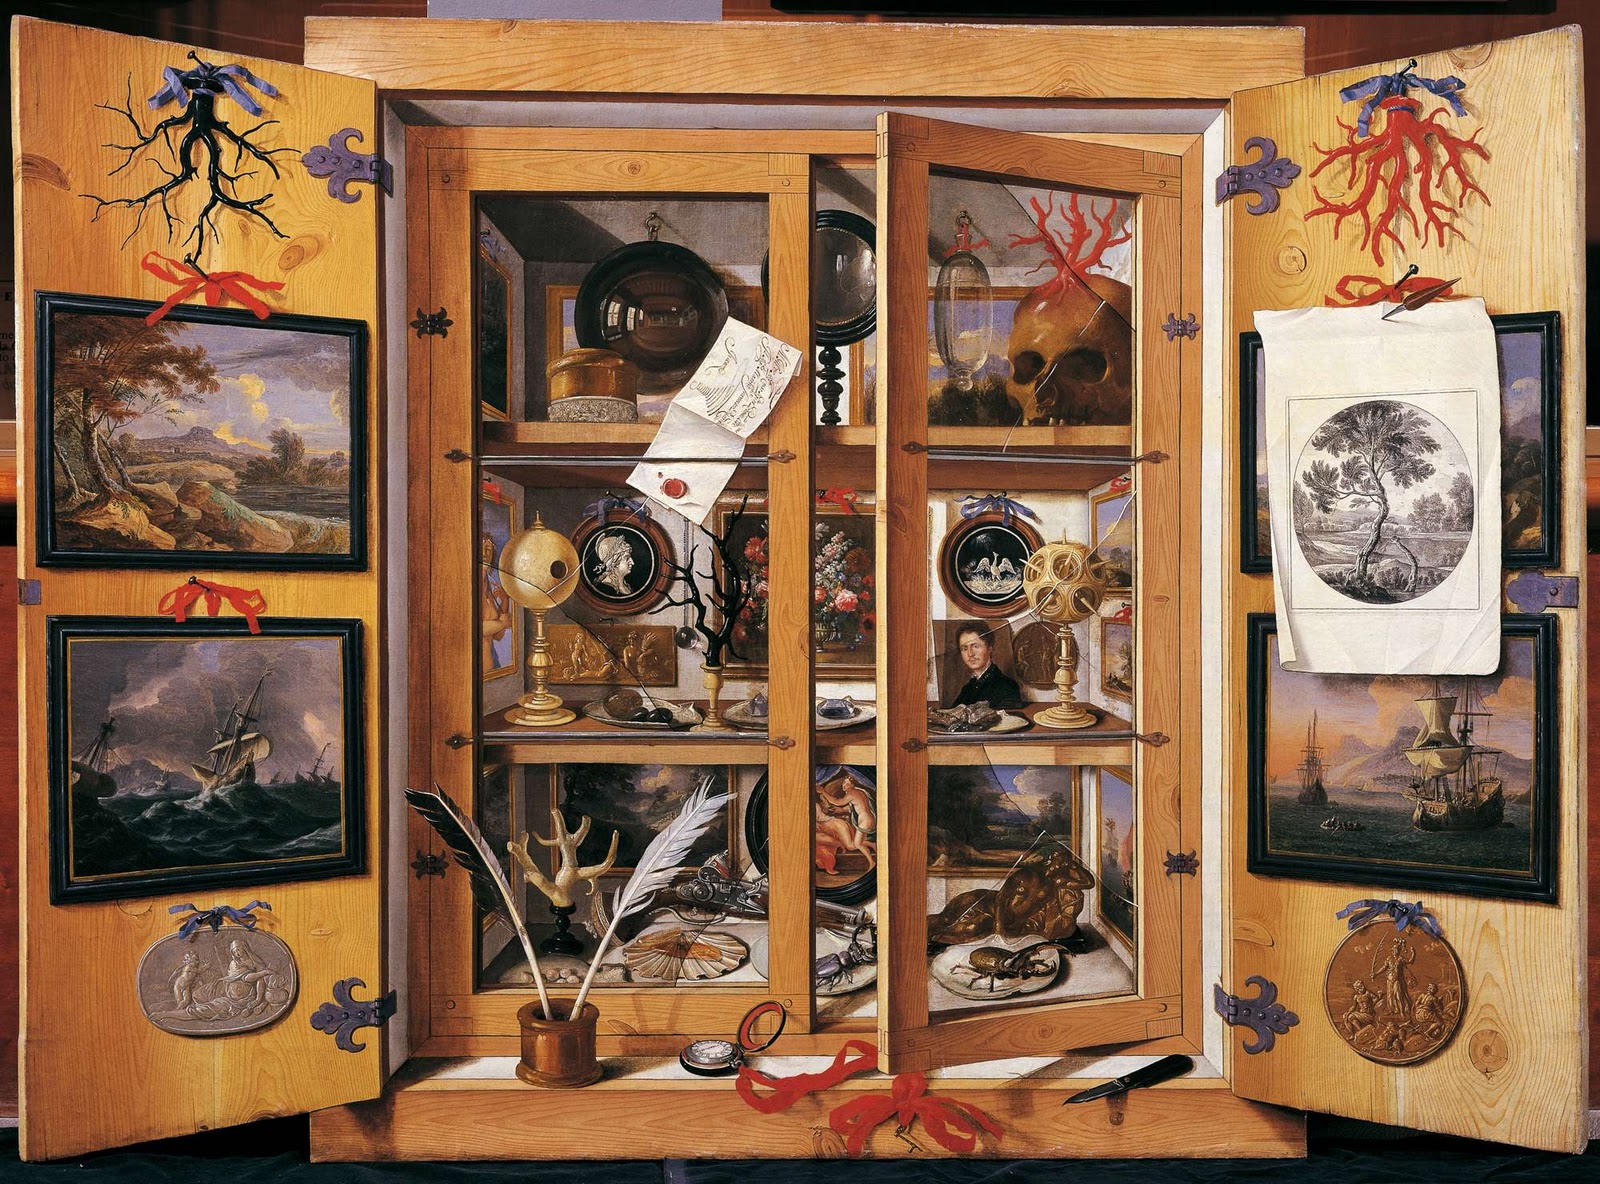 andrea-domenico-remps-a-cabinet-of-curiosity-1690s.jpg